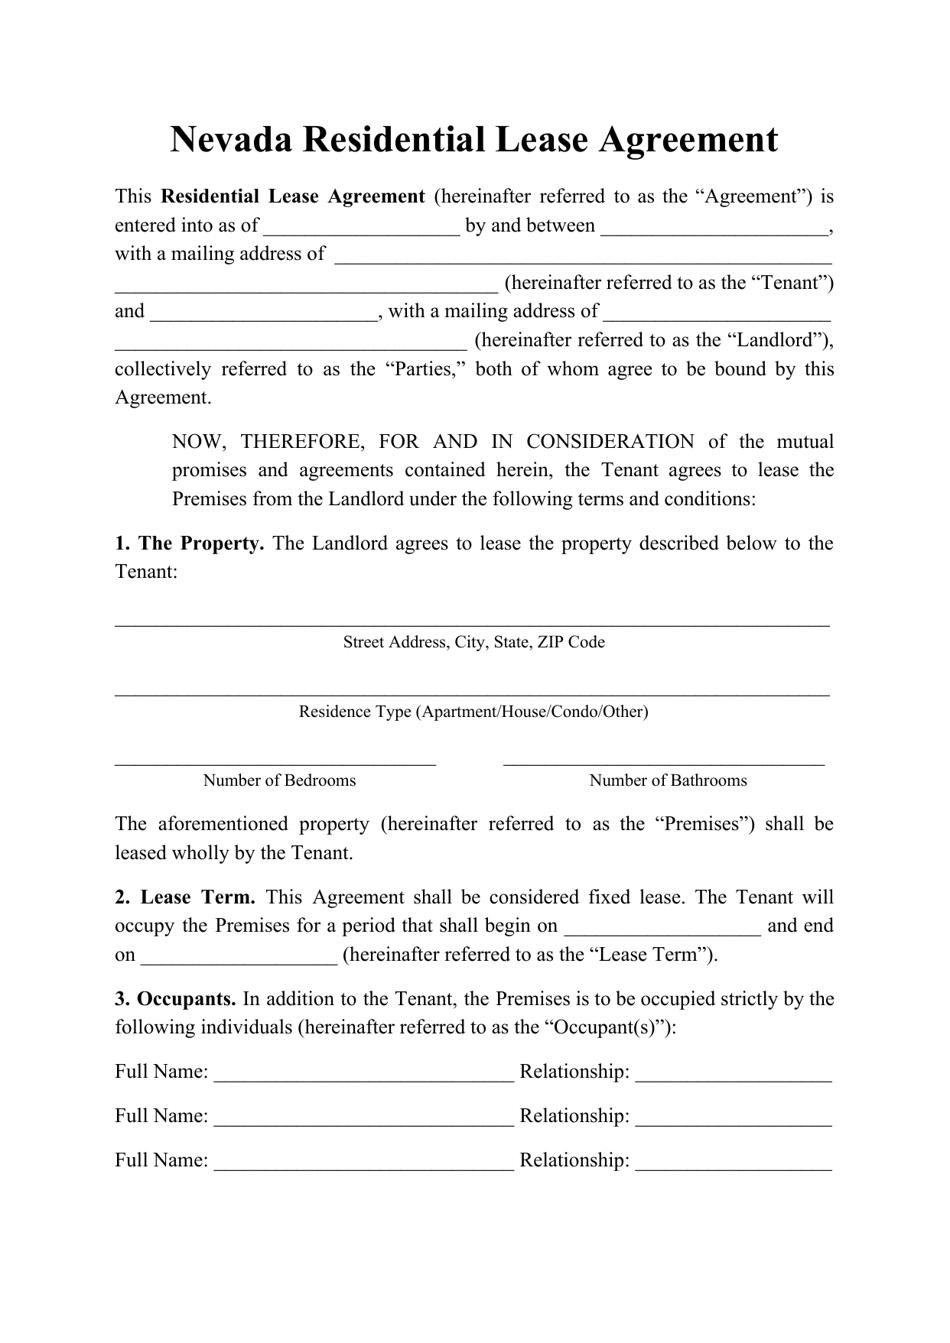 nevada-residential-lease-agreement-template-download-printable-pdf